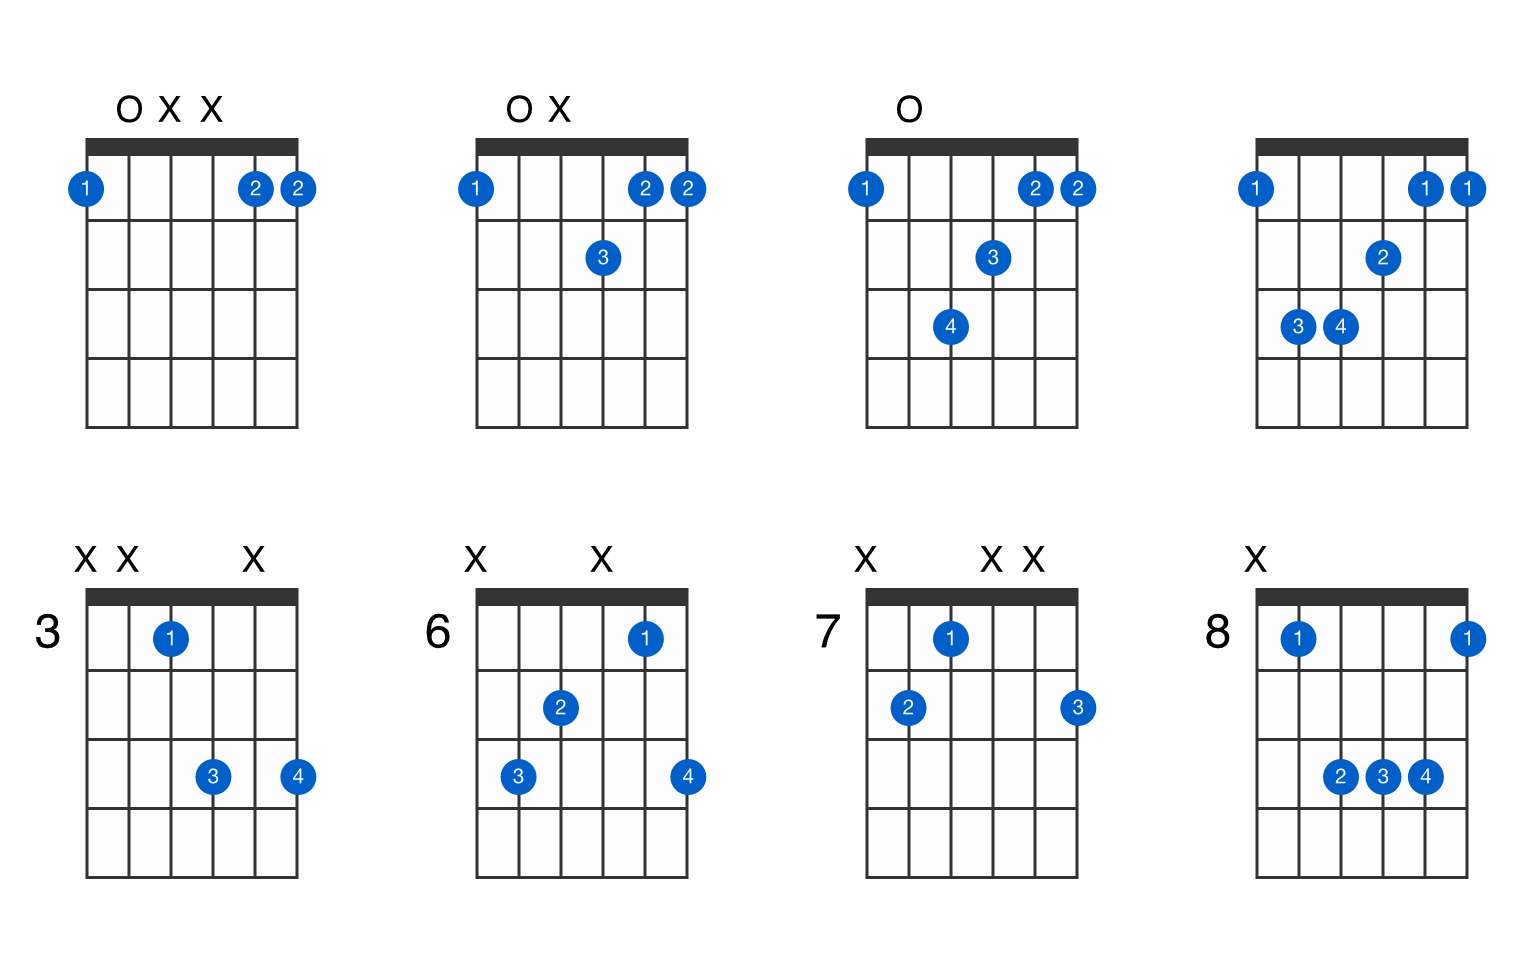 how to play an f major chord on guitar